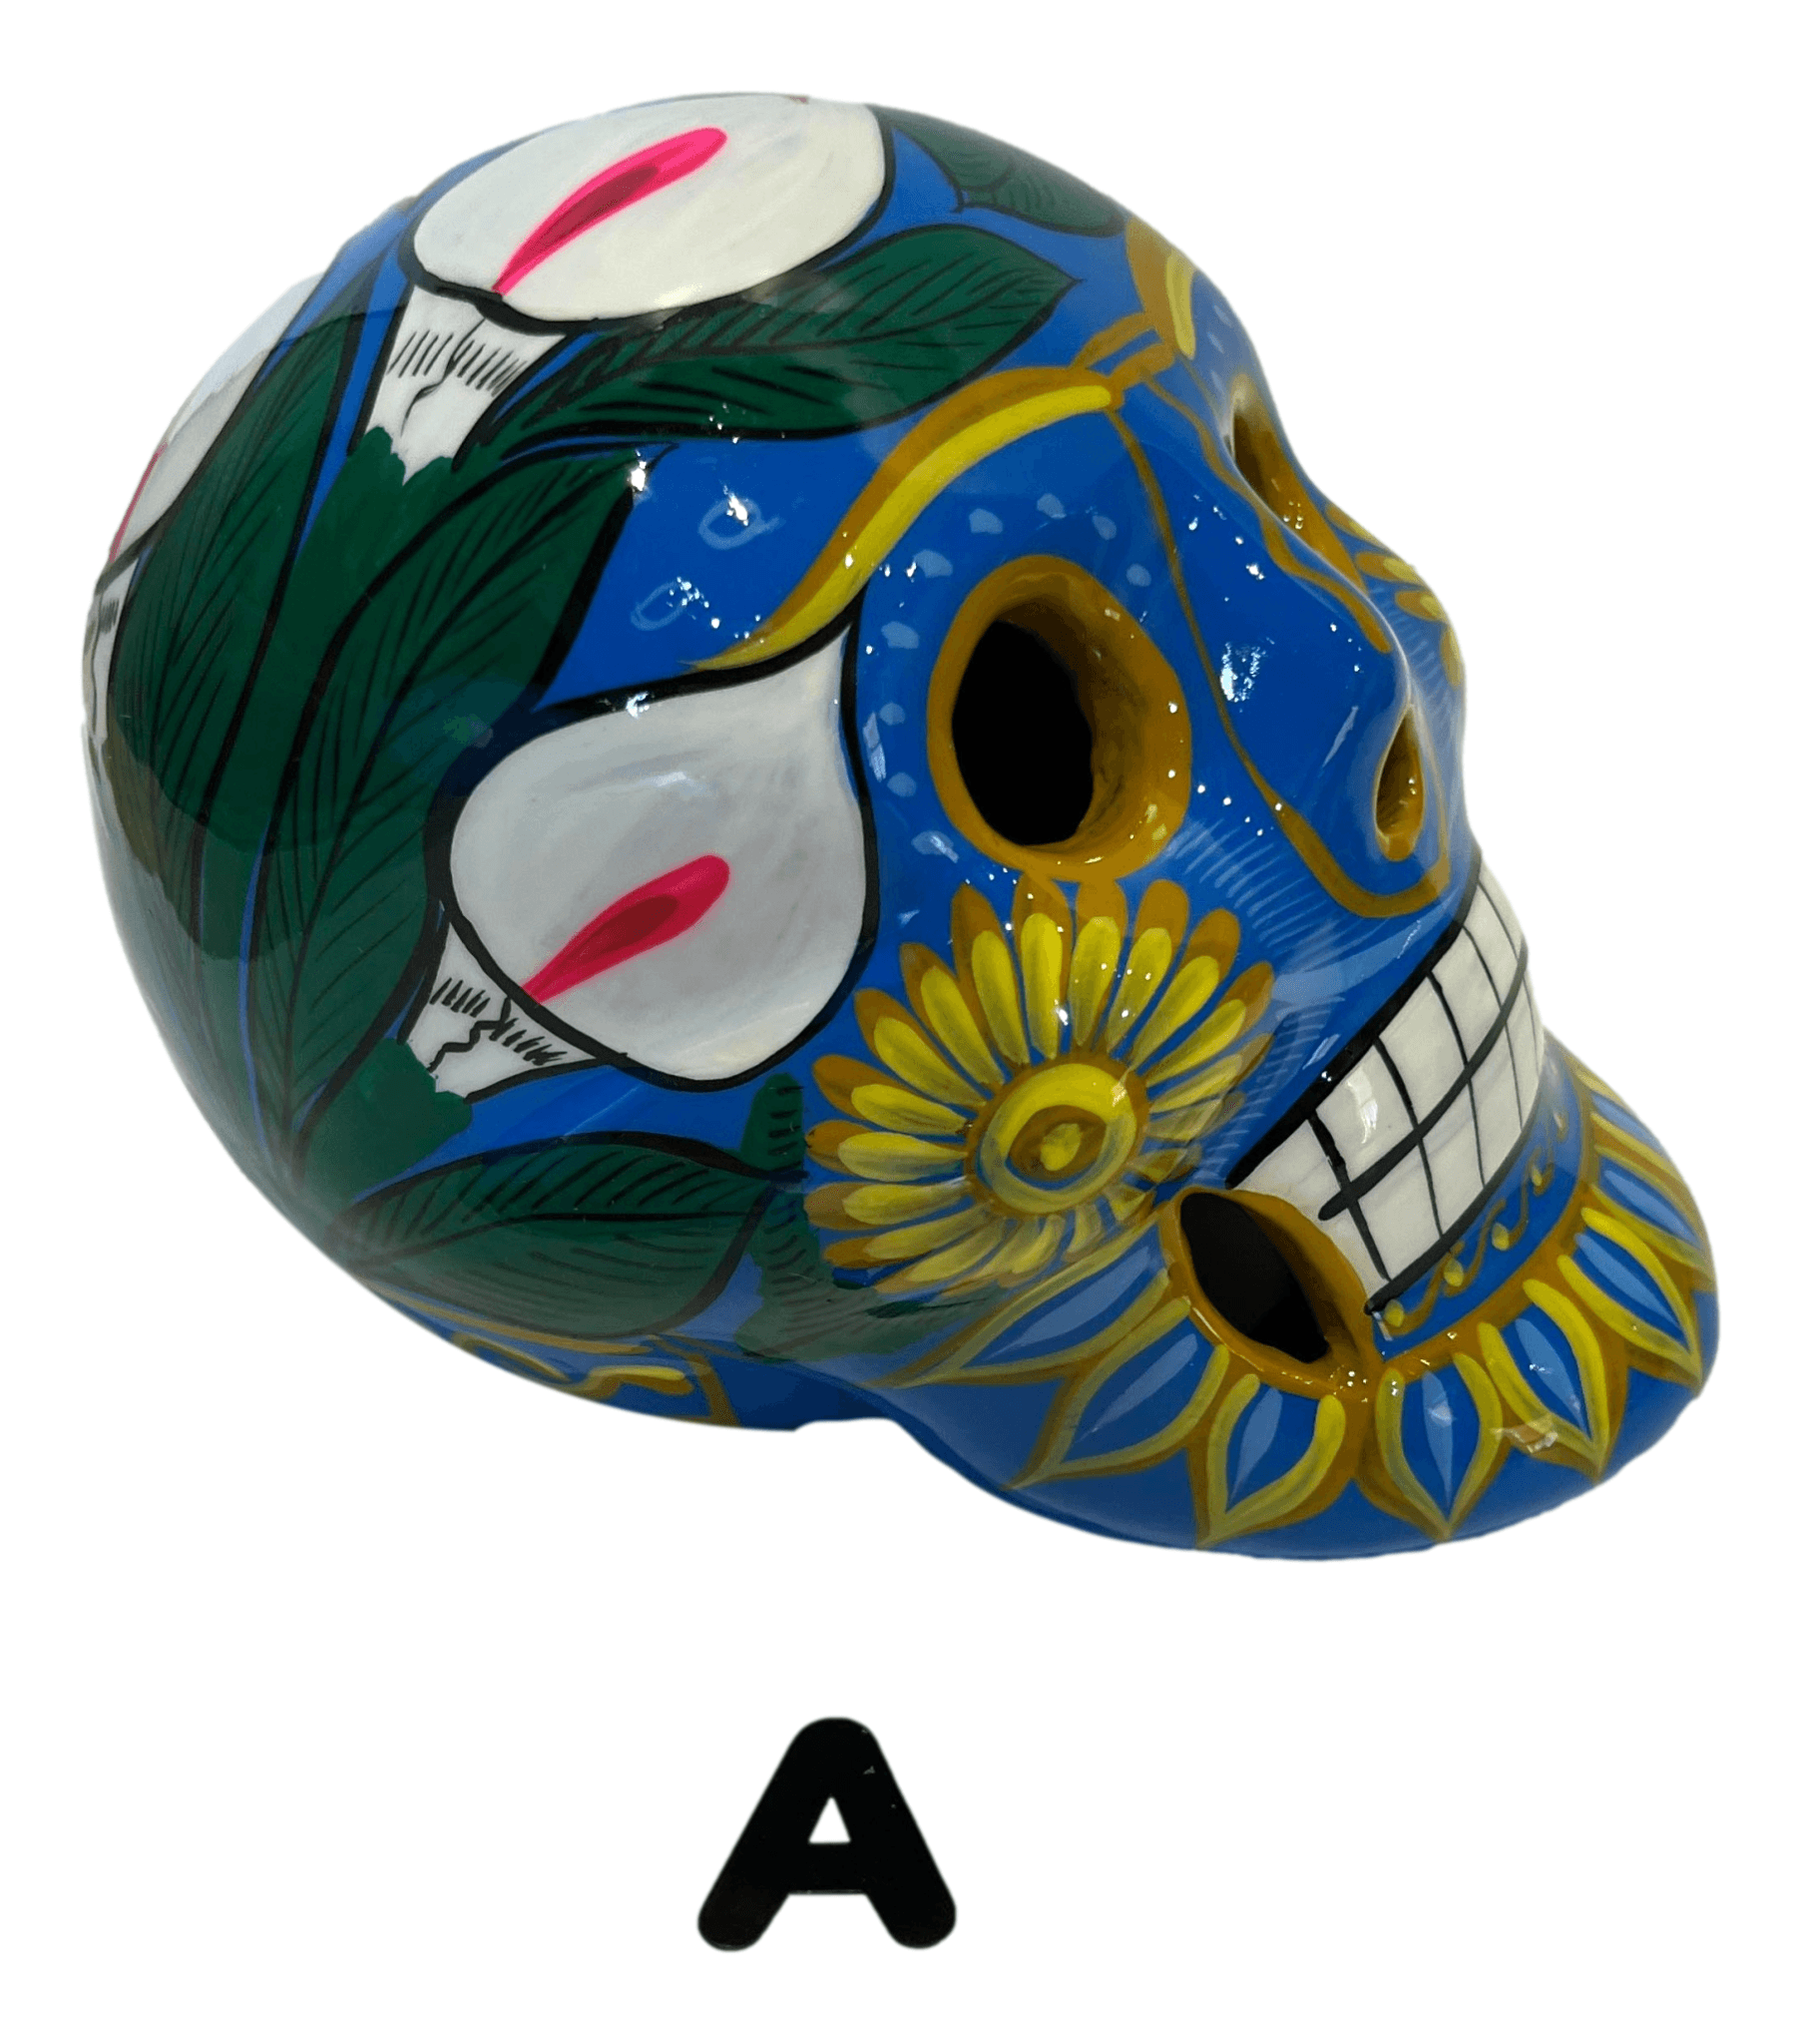 Skull Ceramic Glazed Medium Size Handcrafted By Skilled Mexican Artisans L: 6 inches X W: 3 inches X H: 4.5 inches - Ysleta Mission Gift Shop- VOTED El Paso's Best Gift Shop